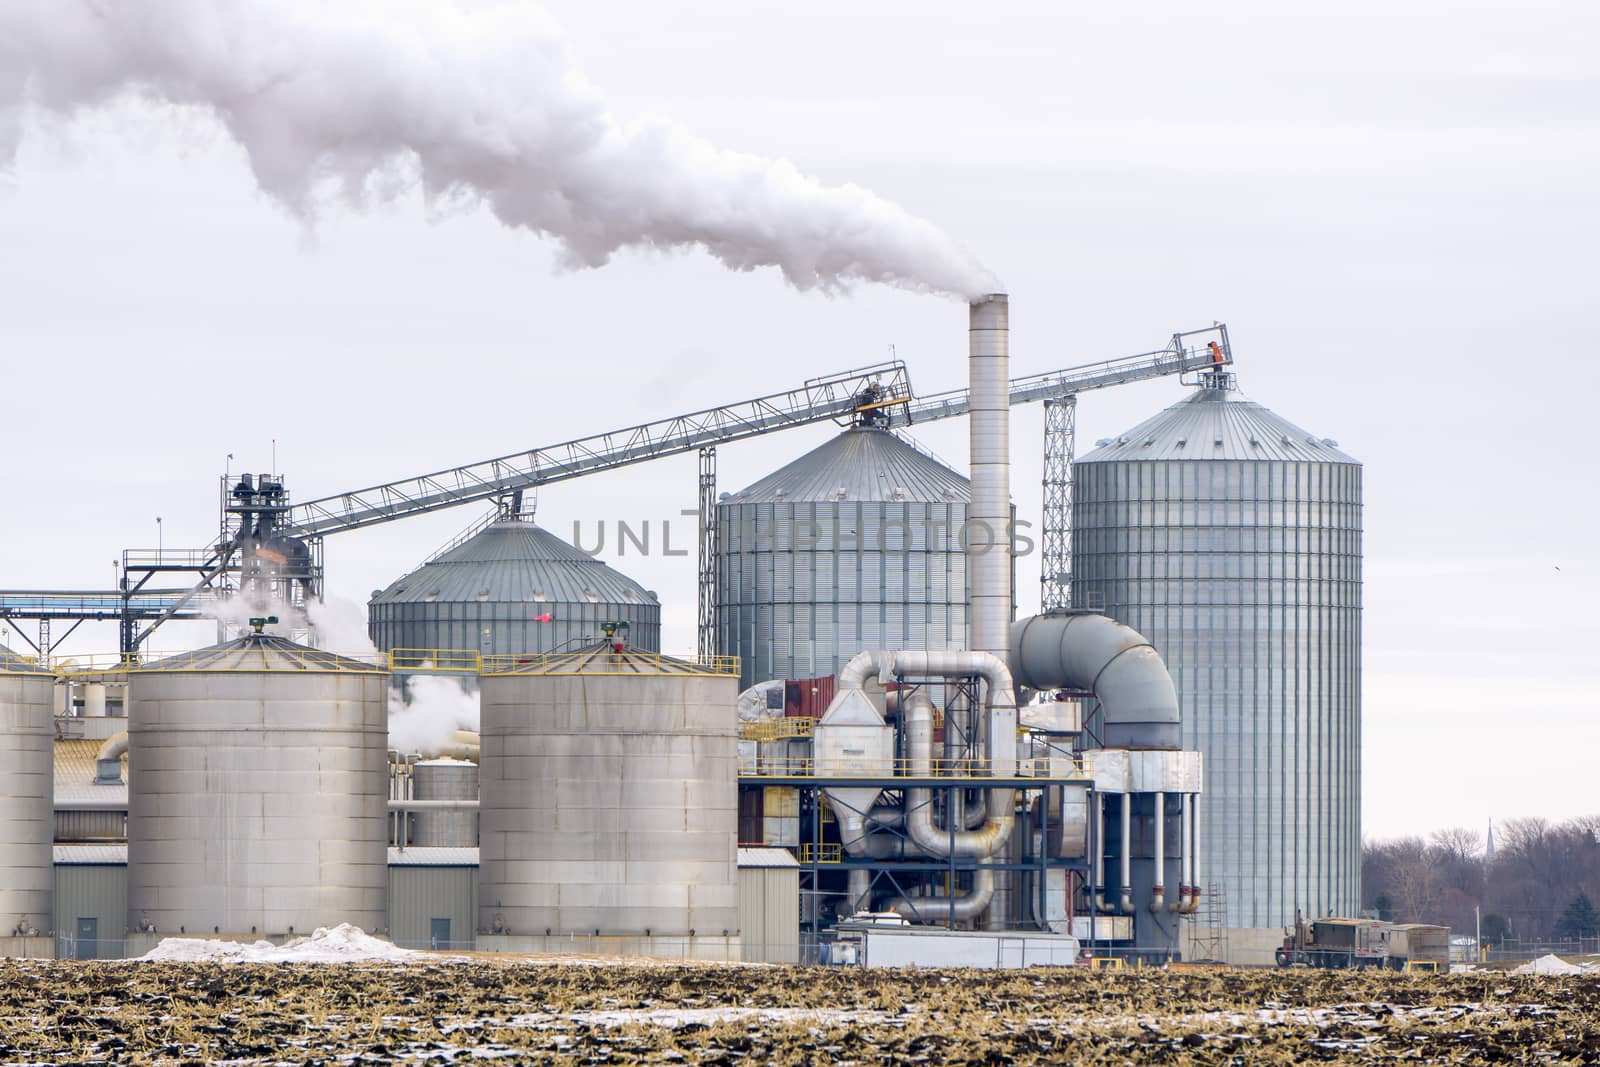 American Ethanol Refinery by wolterk